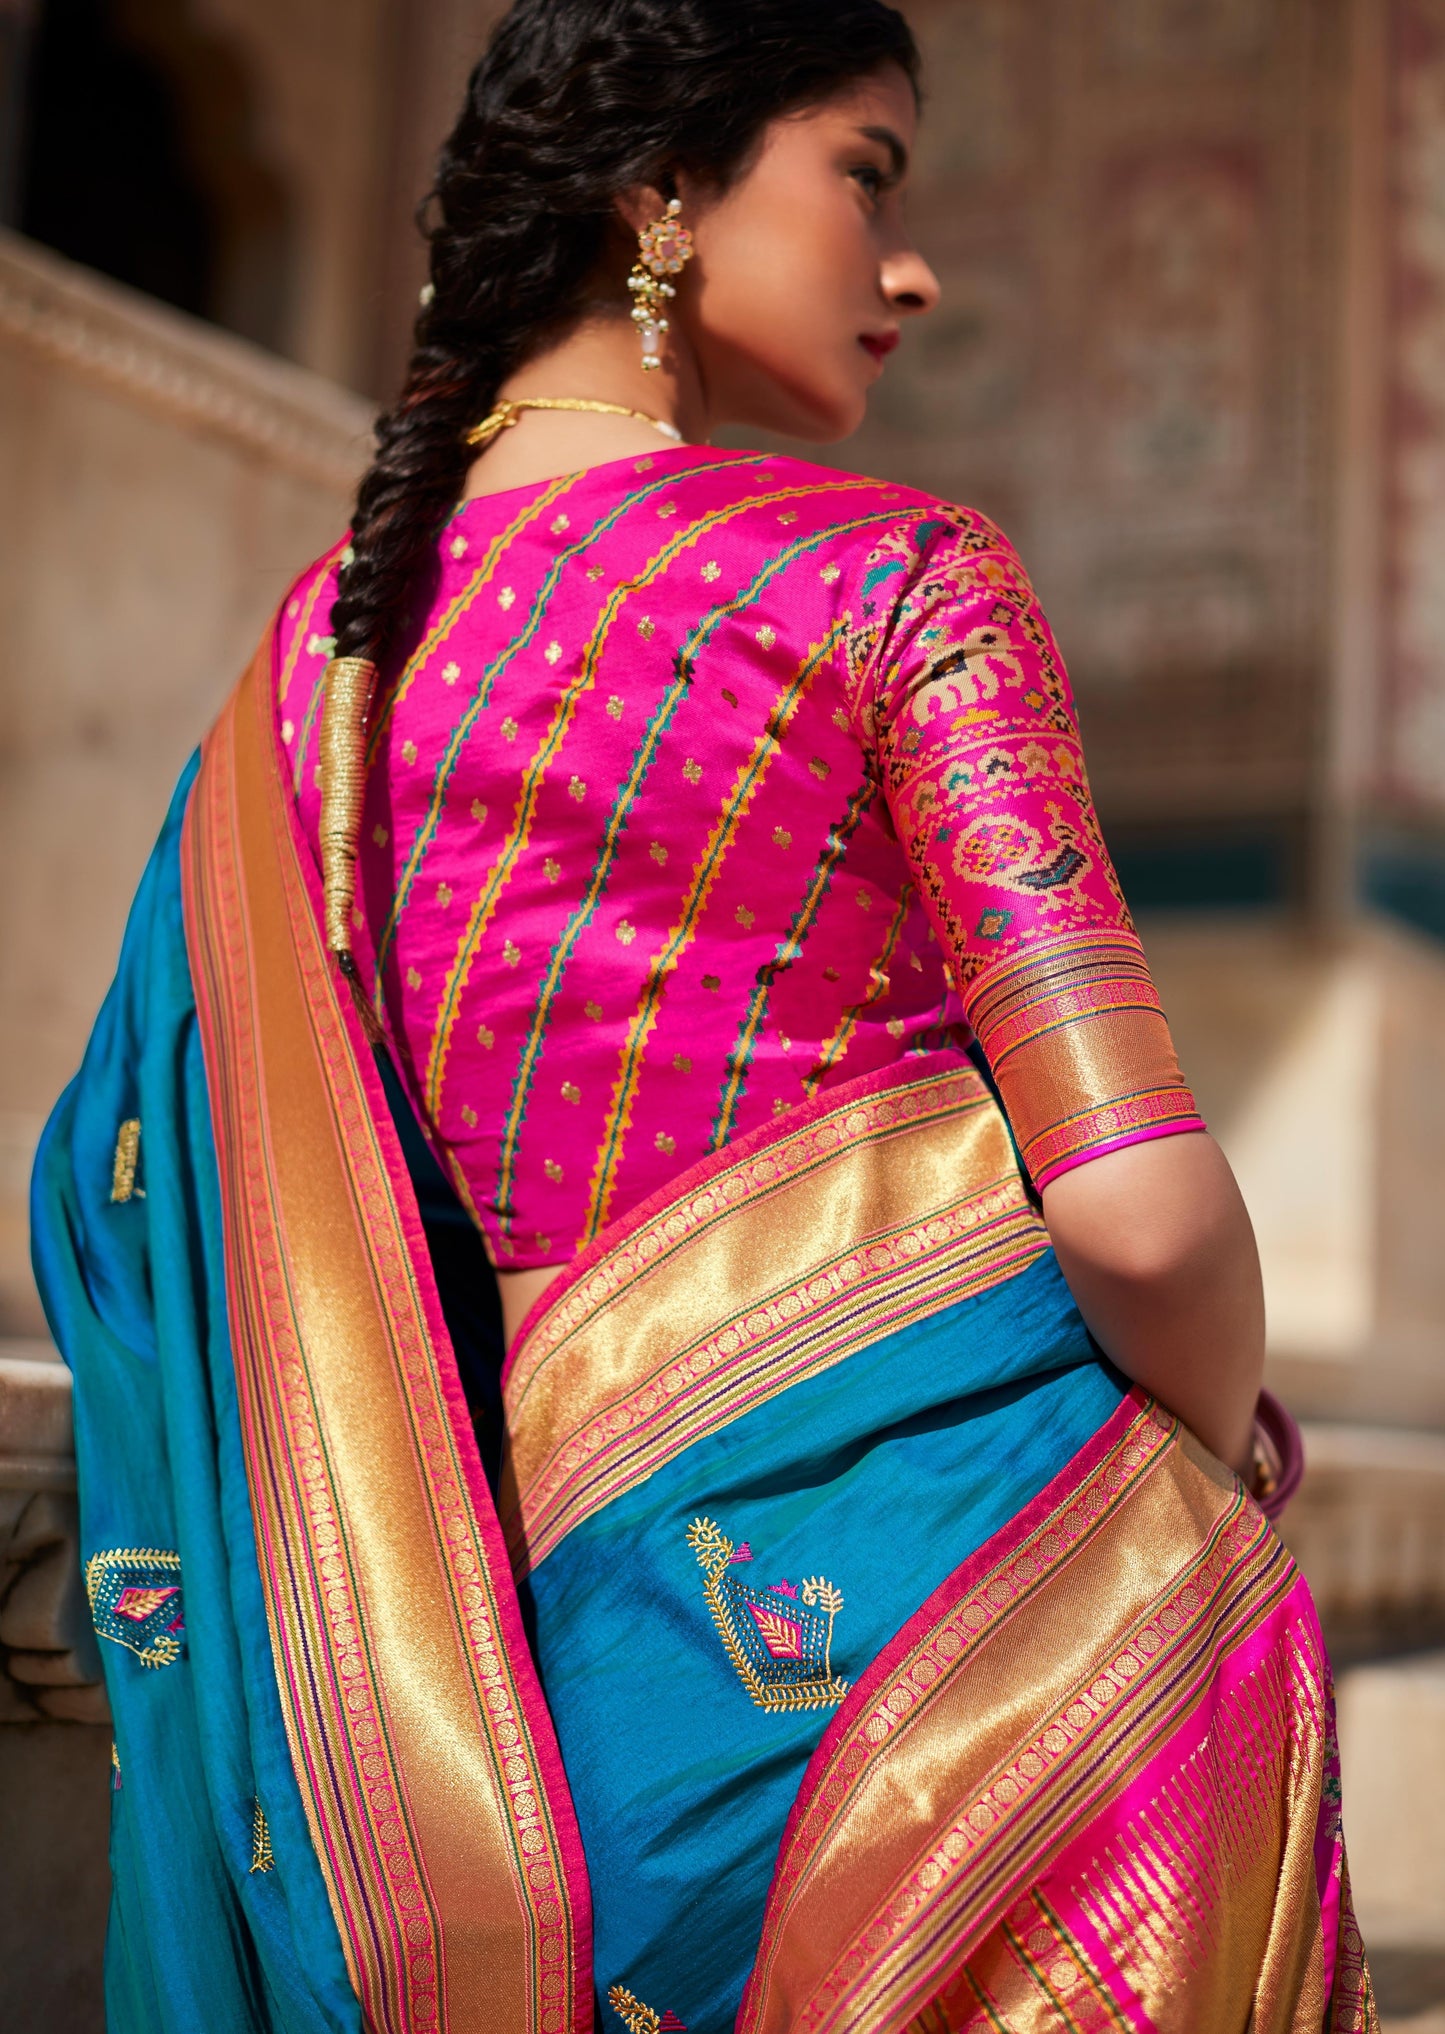 indian woman in braid hairstyle wearing Banarasi-Patola-Blue-Silk-Saree & pink blouse with Threadwork-Hand-Embroidery